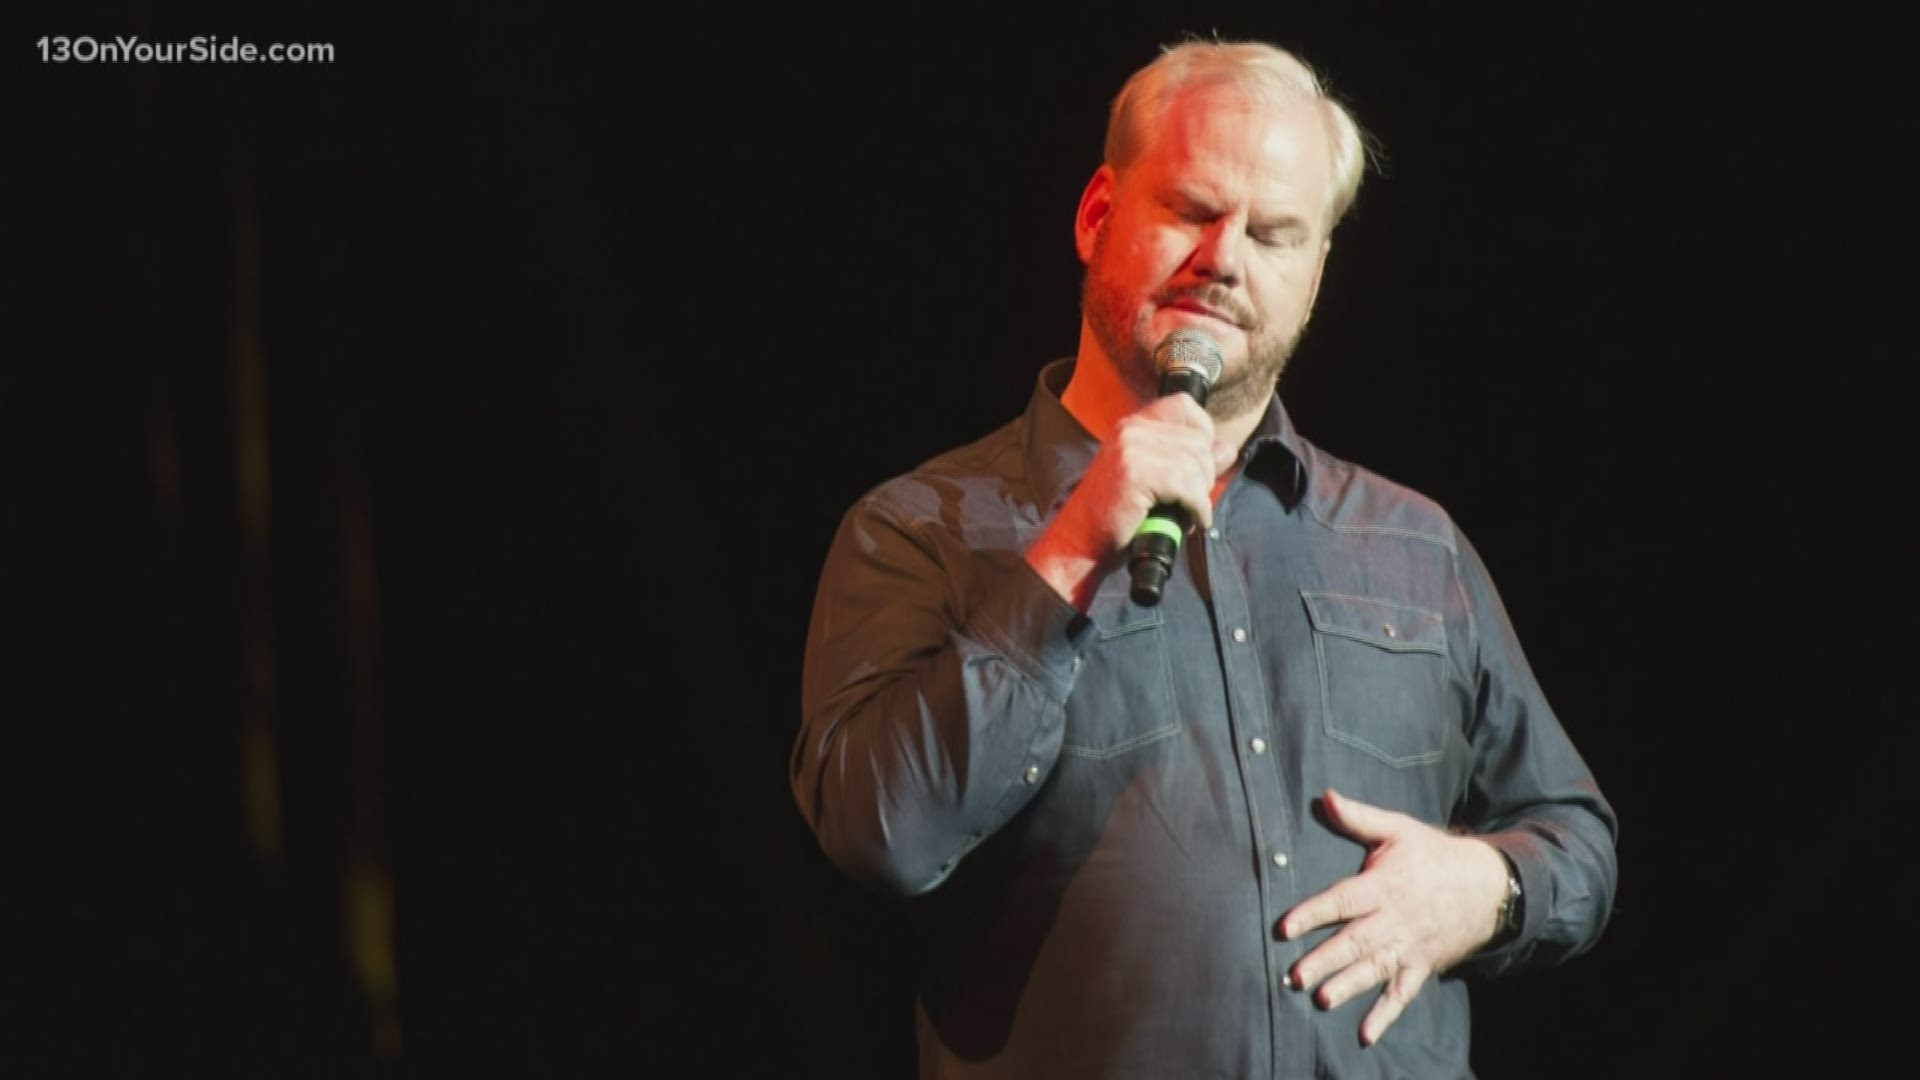 This will be the third appearance for Gaffigan at LaughFest.